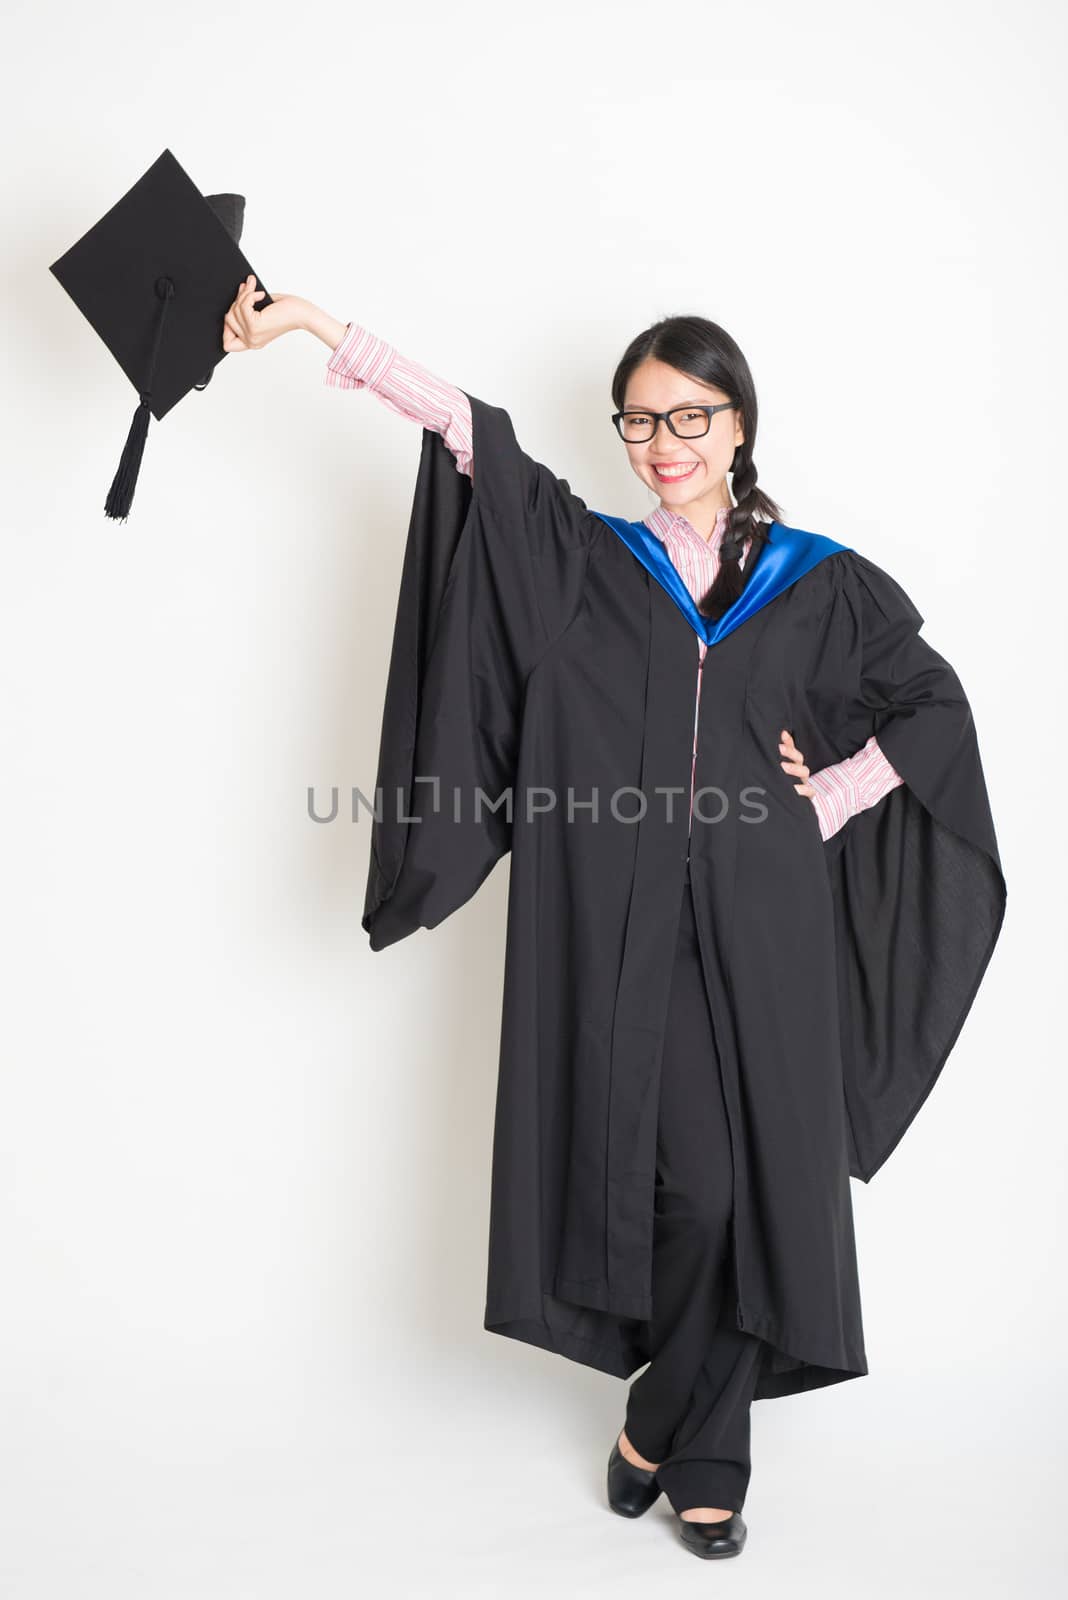 University student hand holding mortarboard by szefei